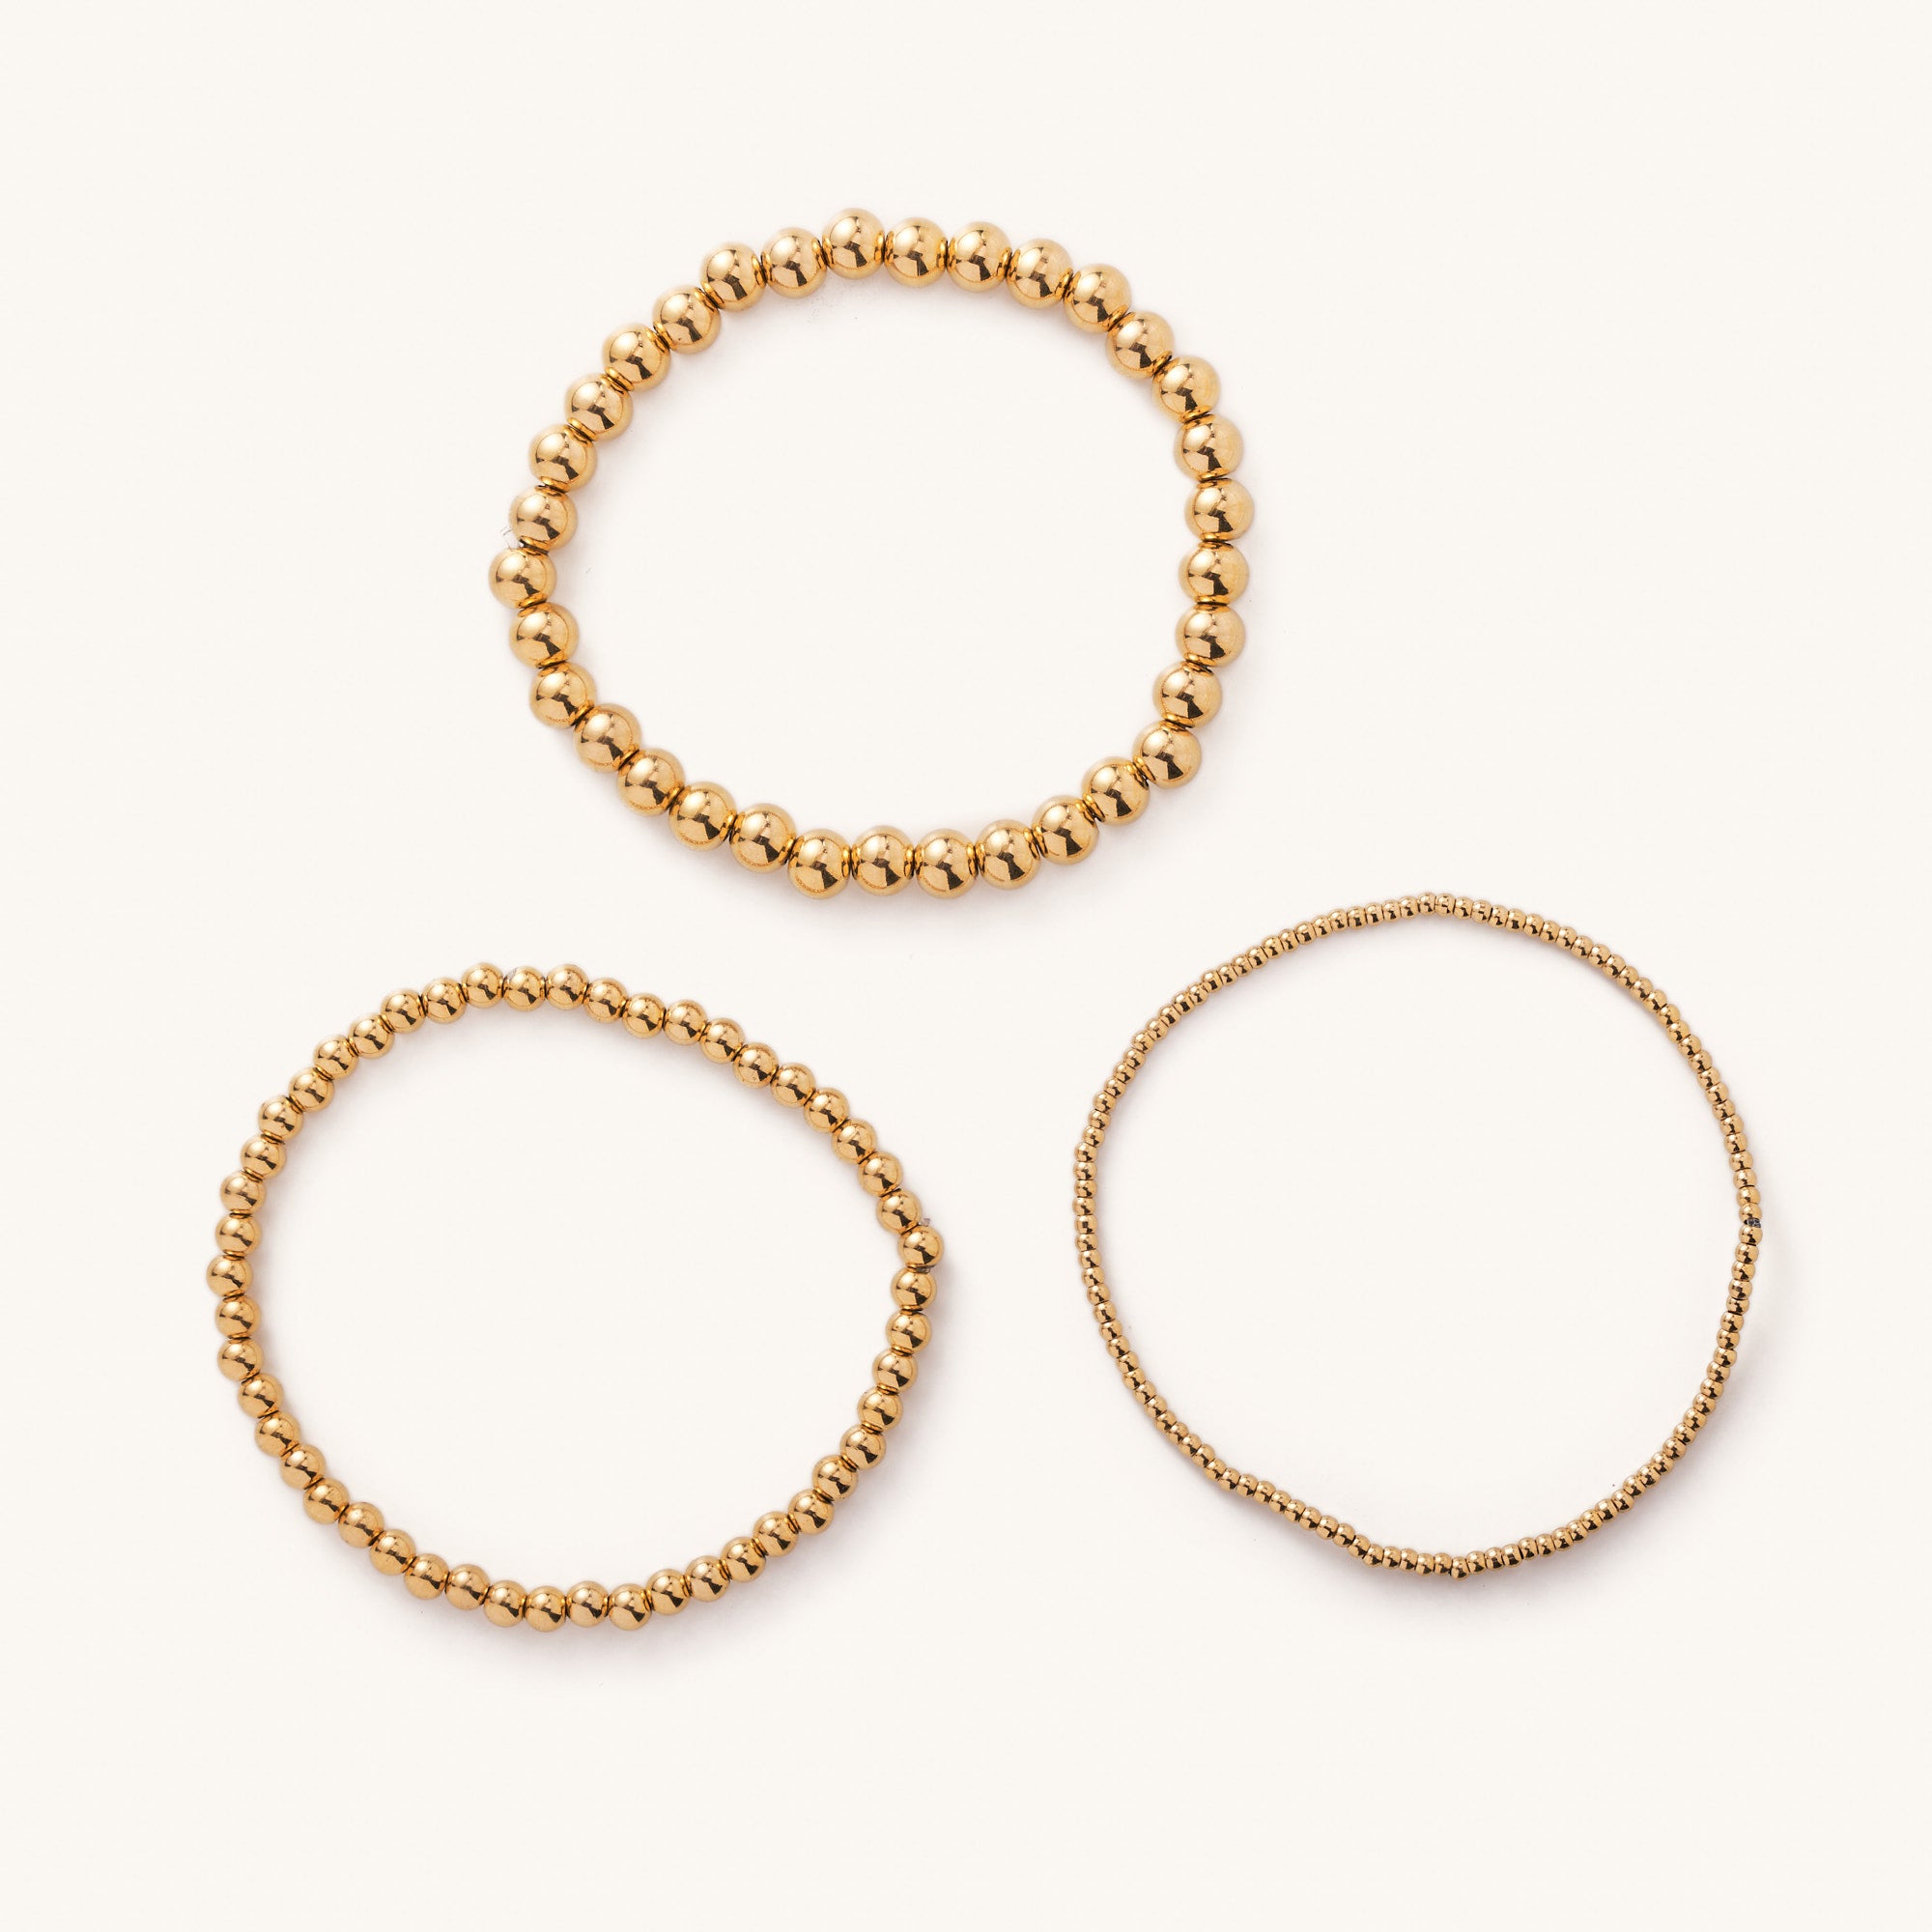 6mm Smooth Round Beads, 14K Gold Filled (10 Pieces) | BeadKr